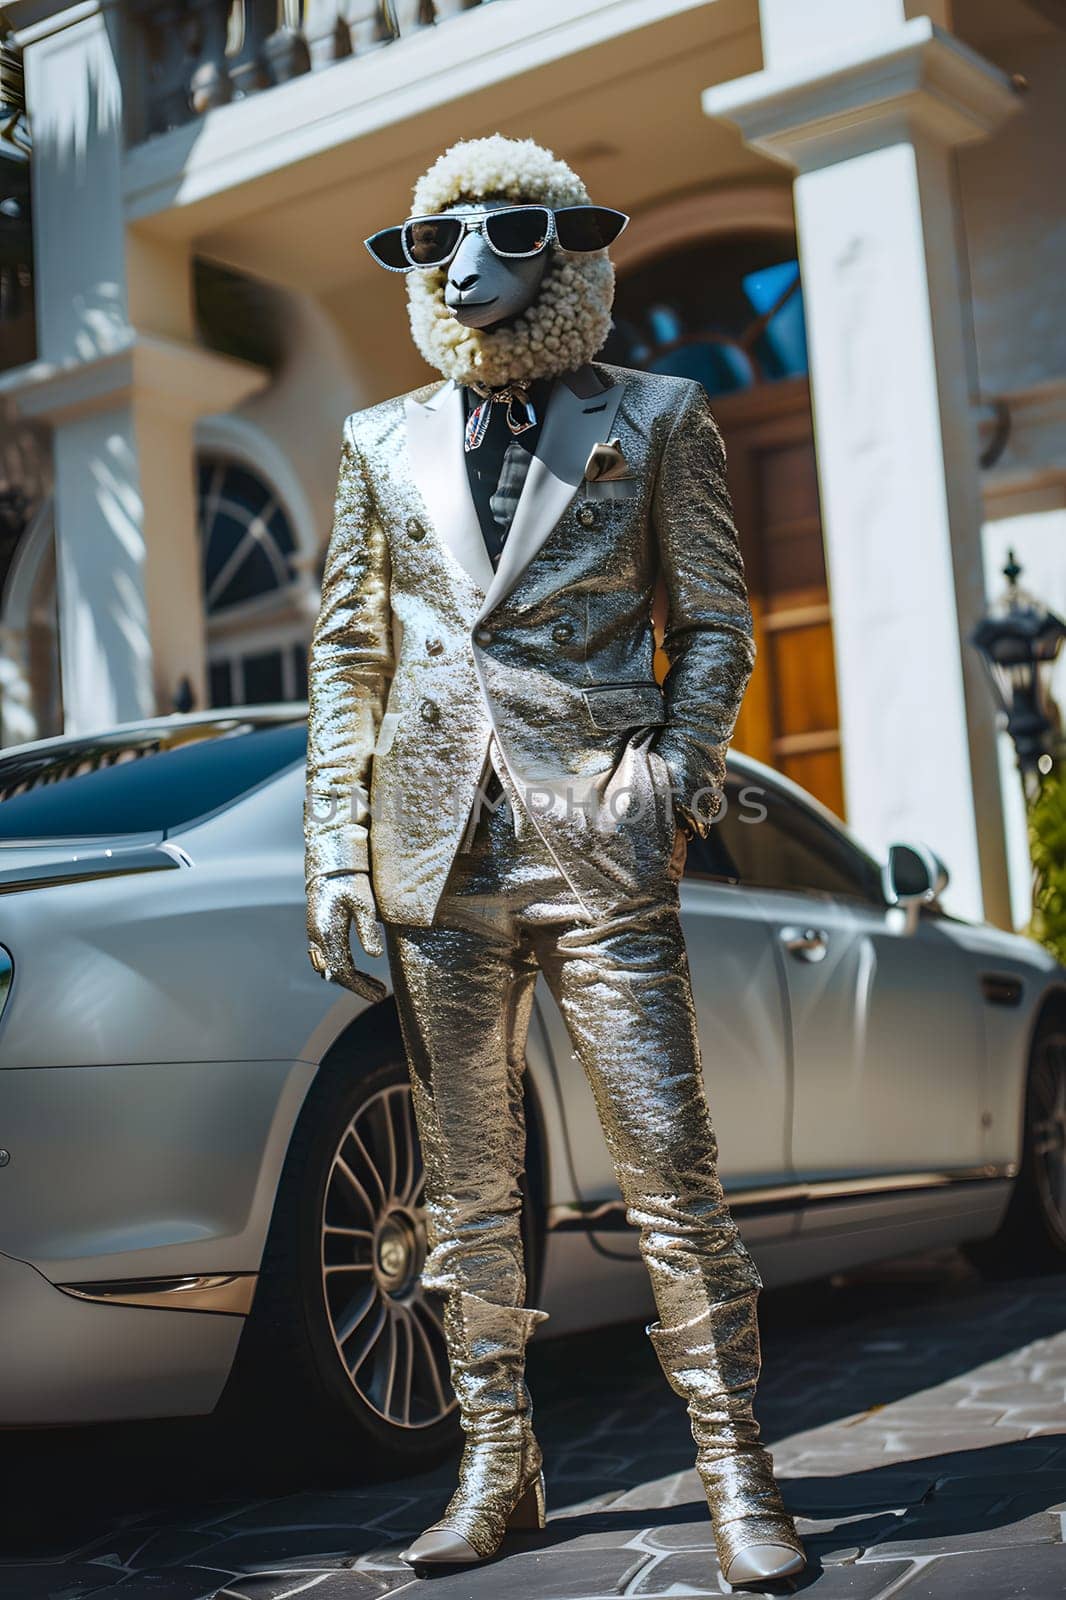 A man in sheep costume is posing next to a silver car with shiny wheel on the road, creating a unique juxtaposition of vehicle and animal disguise